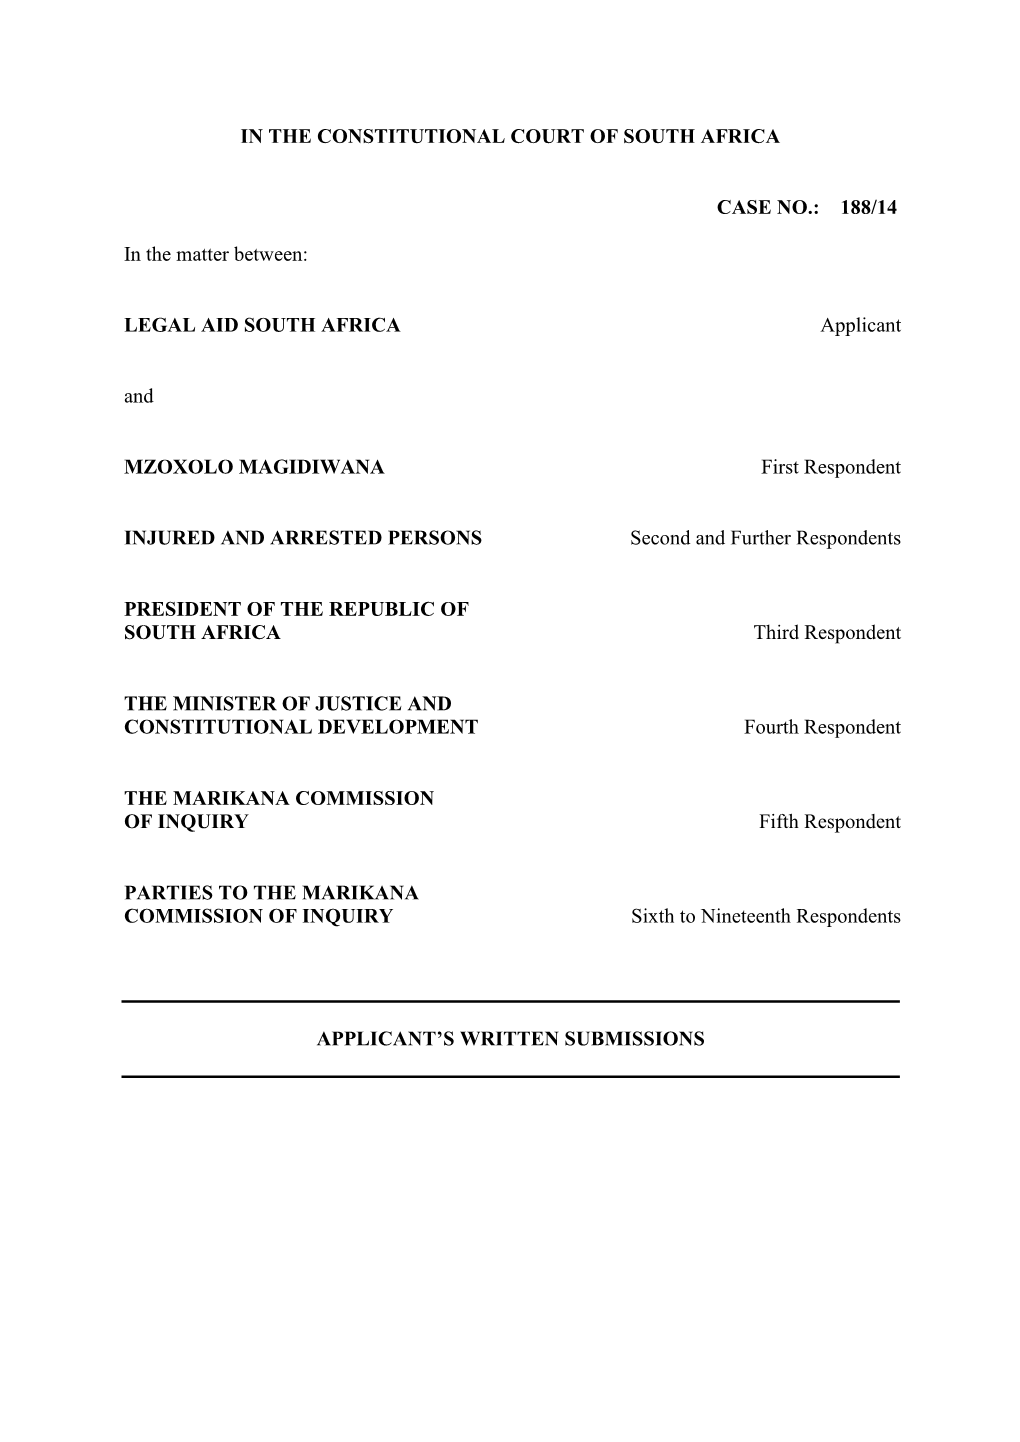 [2015] ZACC 28 Heads of Argument Legal Aid South Africa